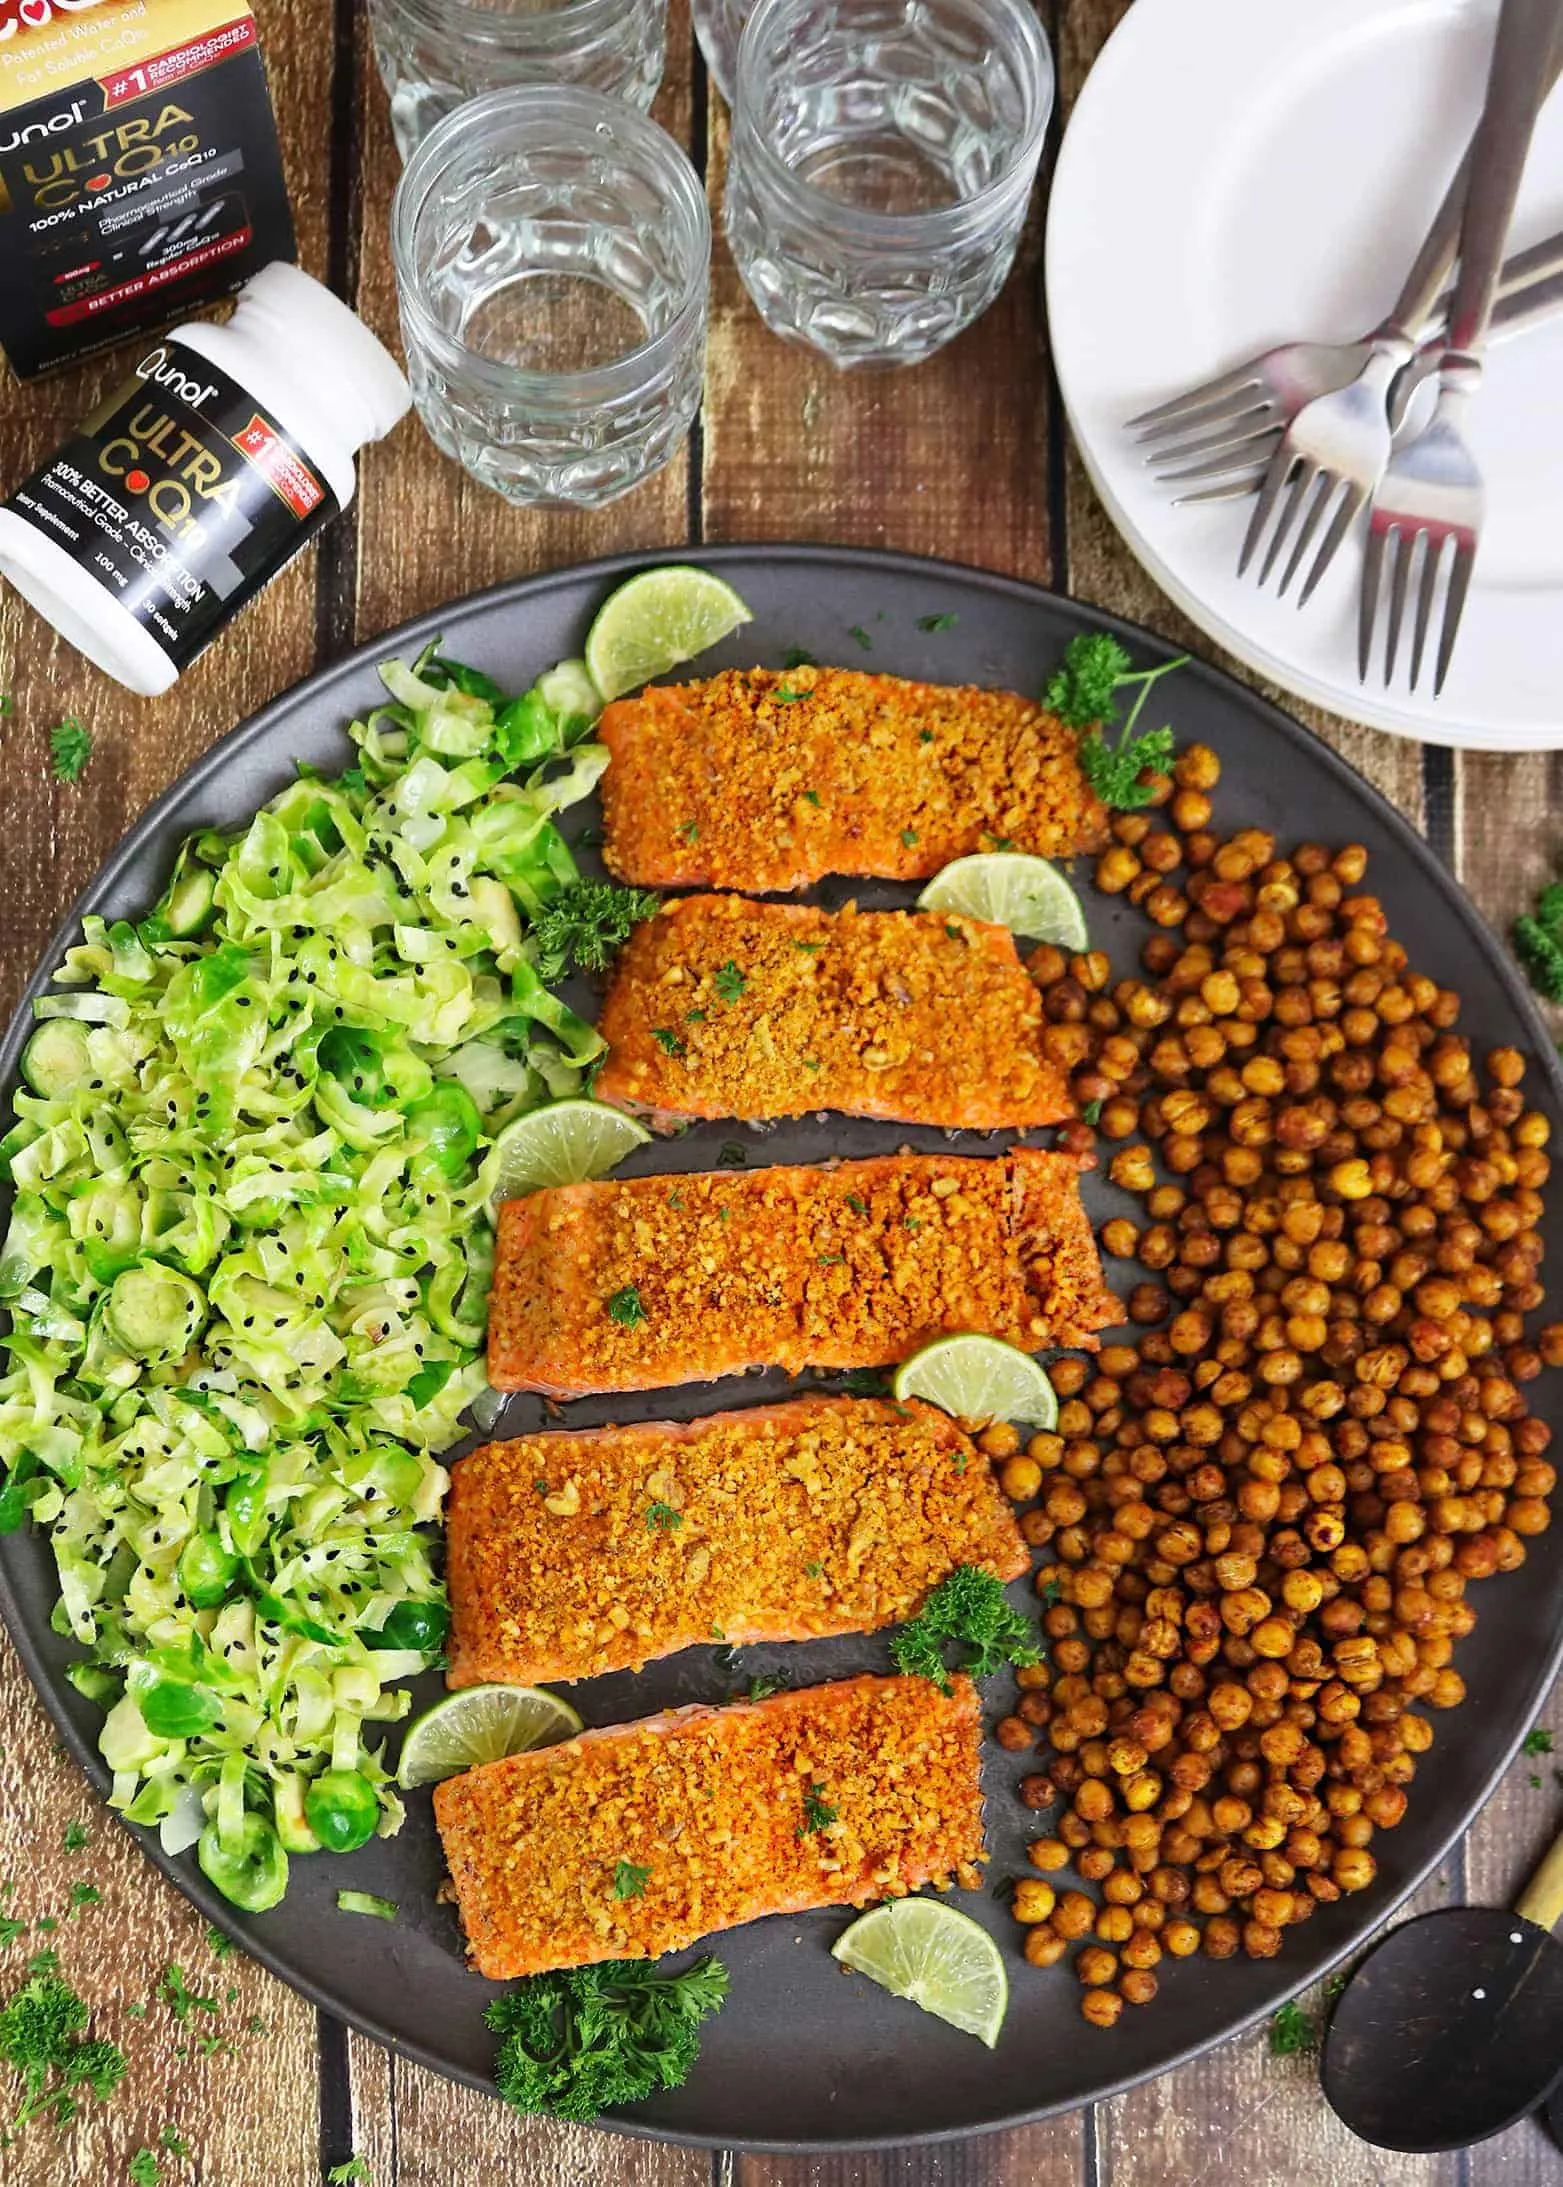 Walnut Encrusted Spicy Salmon with Roasted Chickpeas and Brussels Sprouts 